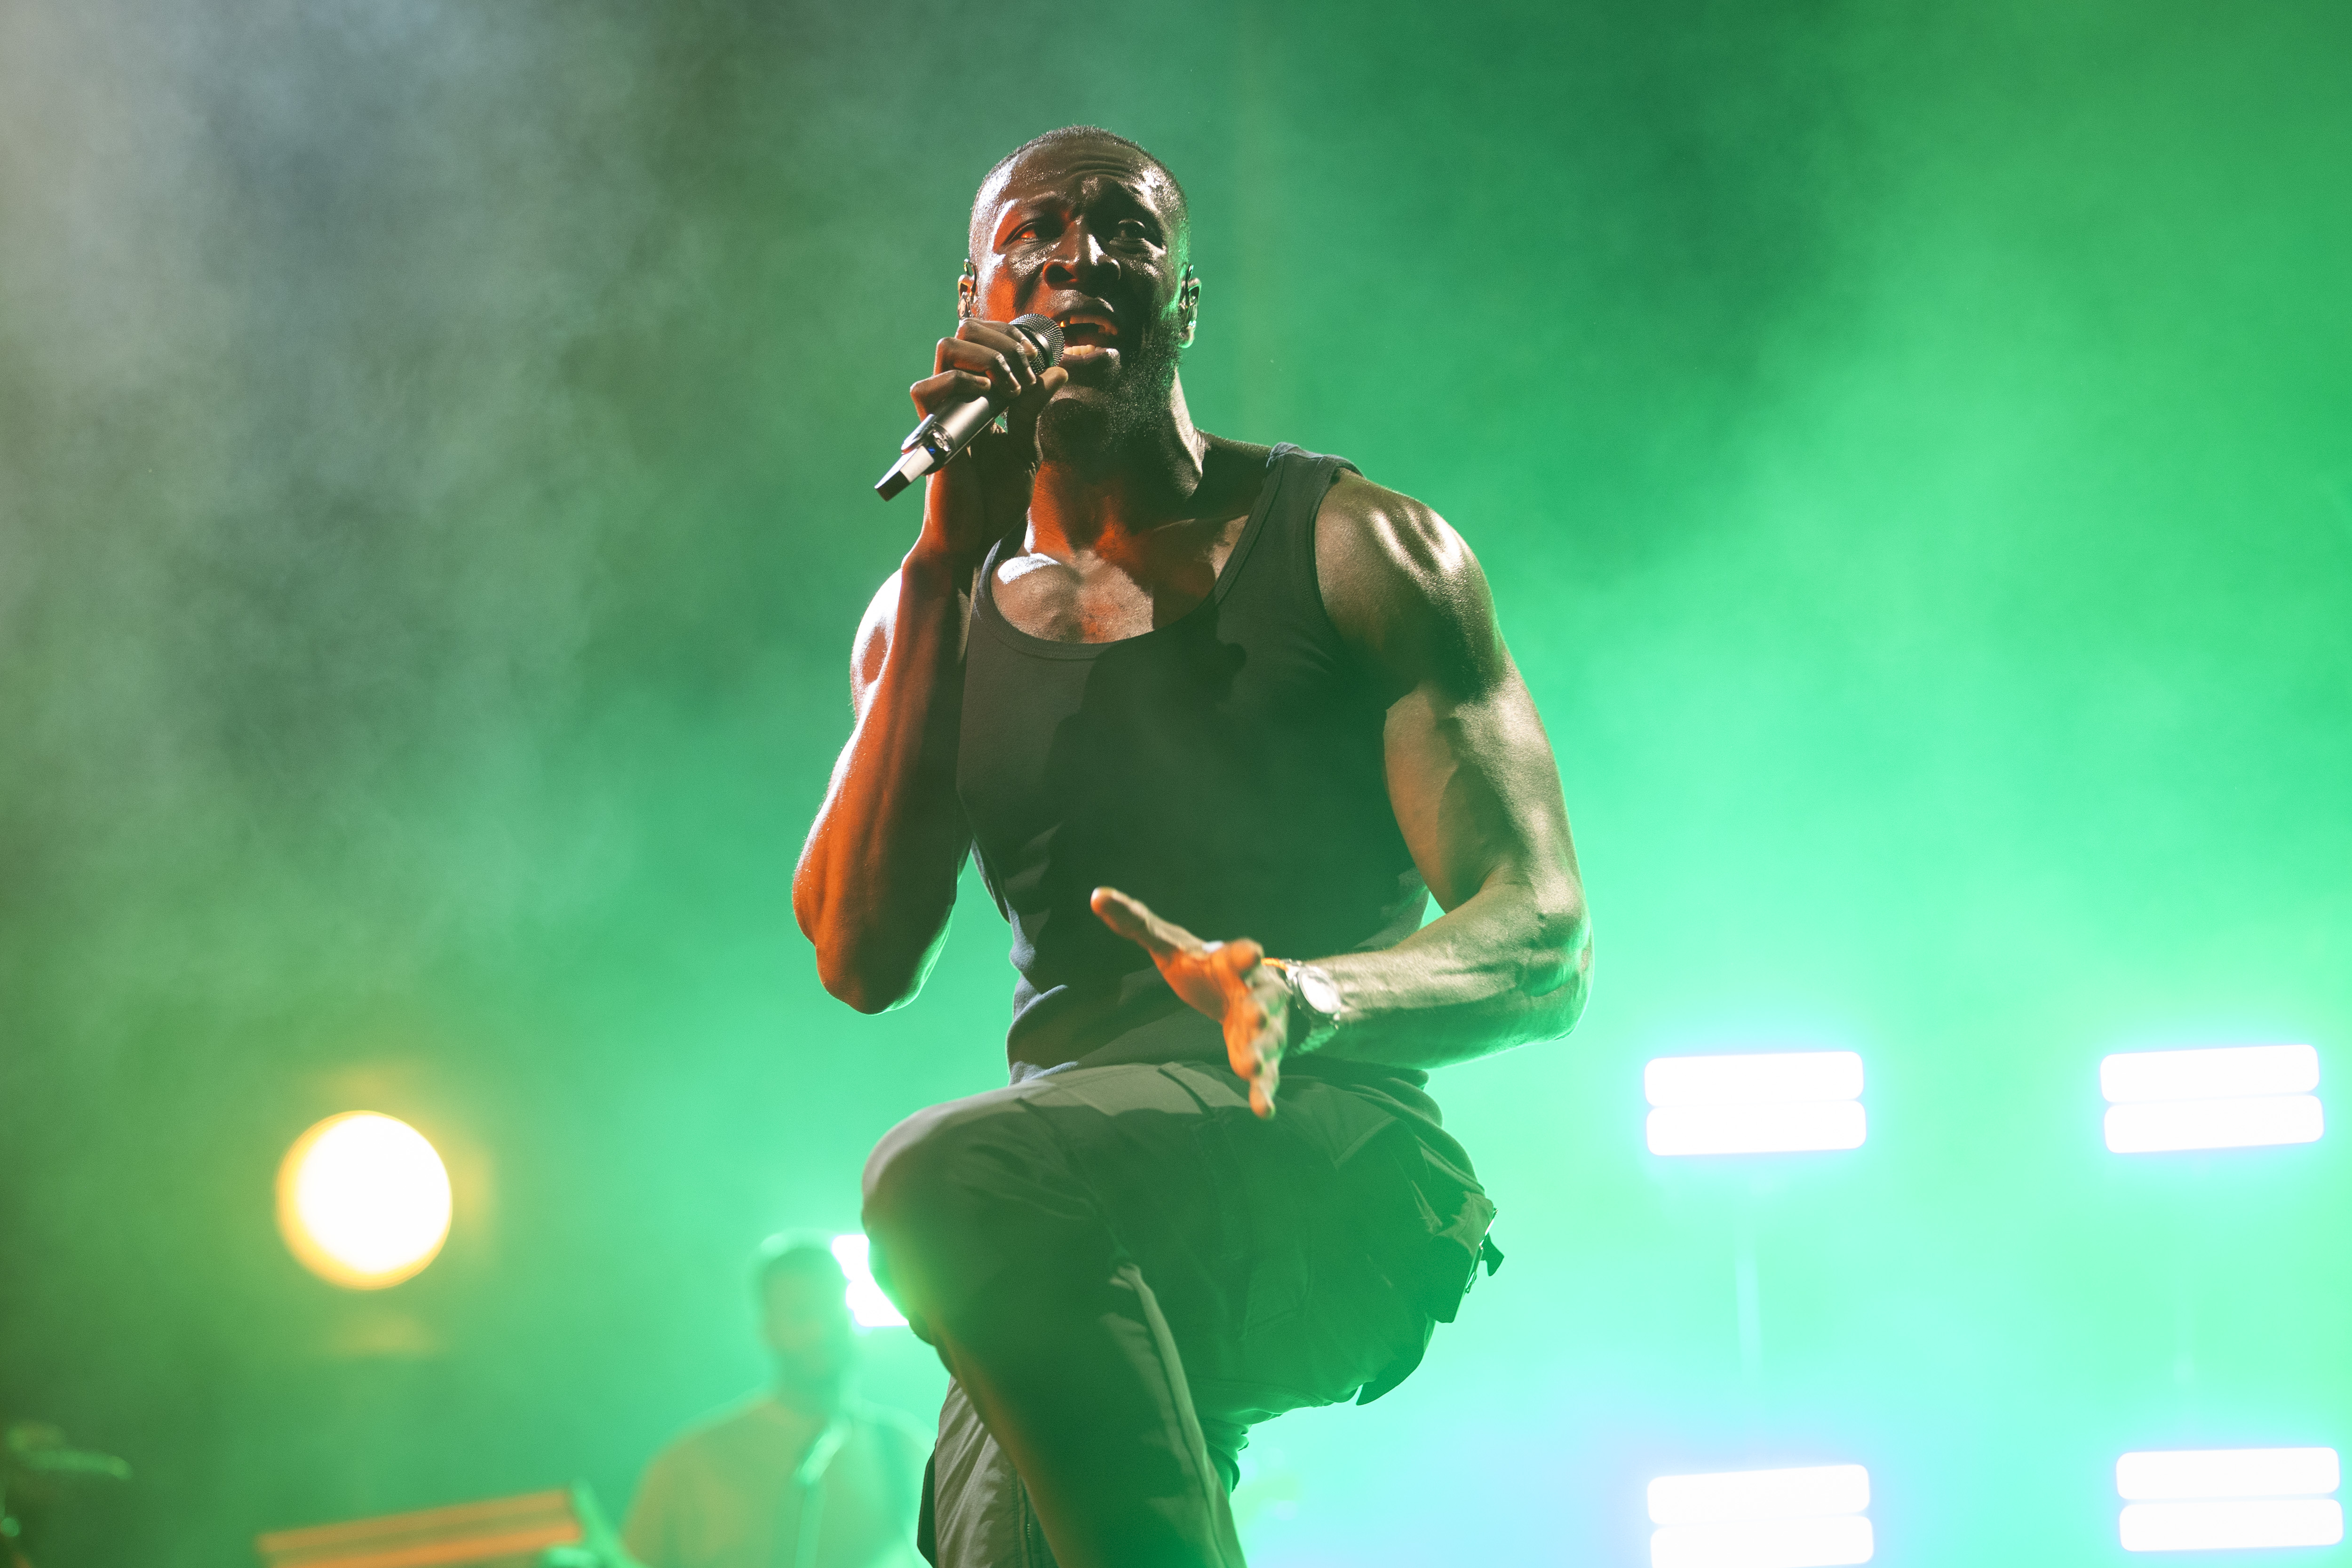 Stormzy has collaborated with many major artists in the past